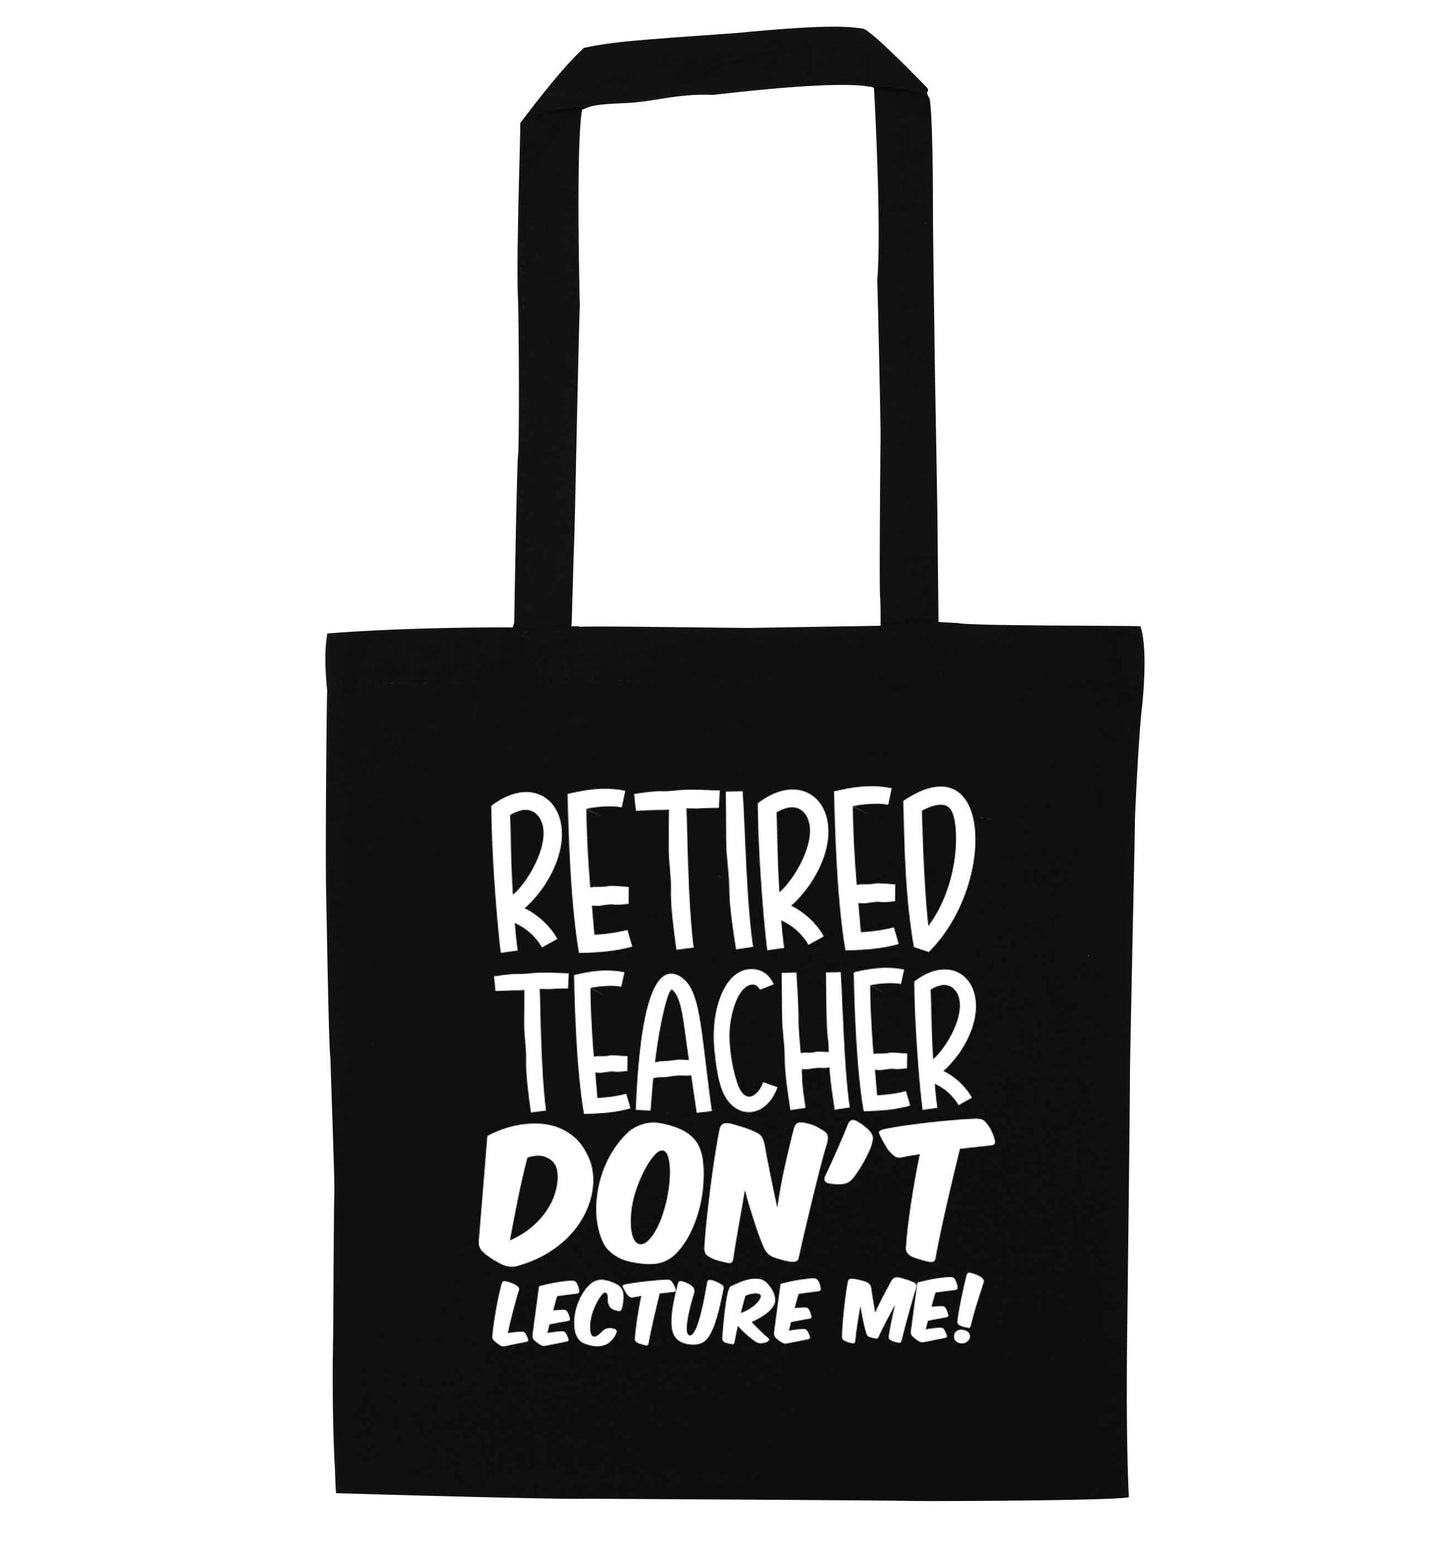 Retired teacher don't lecture me! black tote bag